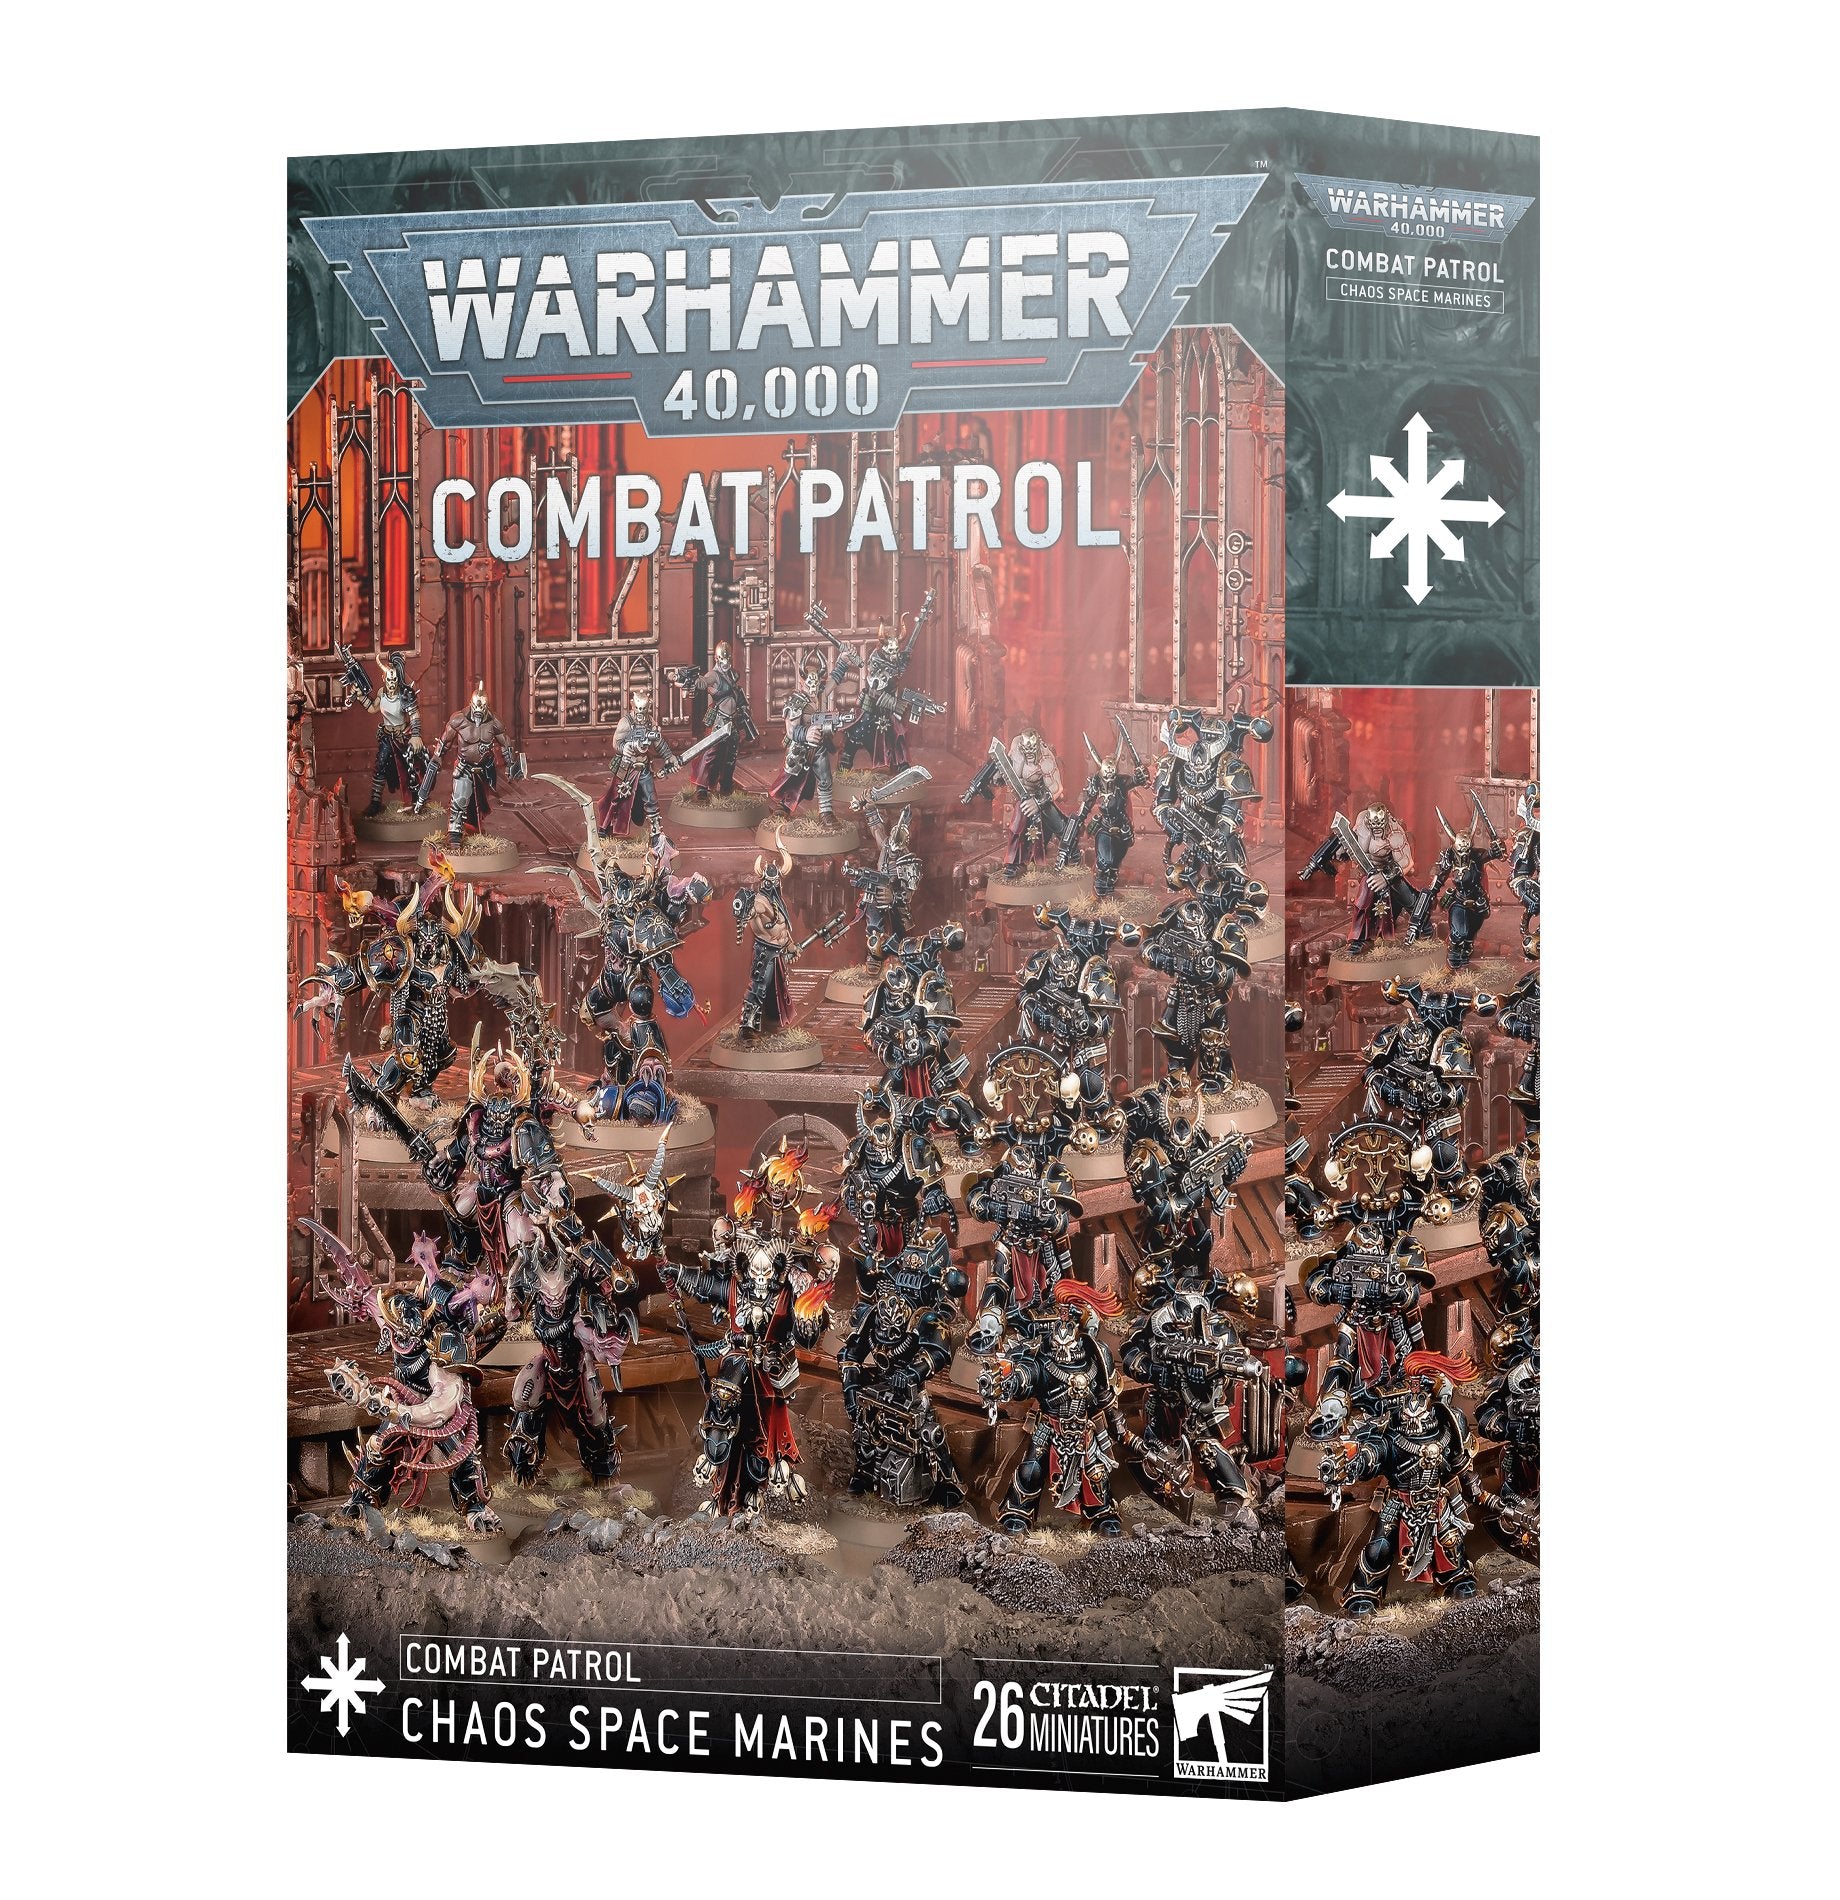 Combat Patrol: Chaos Space Marines - Release Date 25/5/24 - Loaded Dice